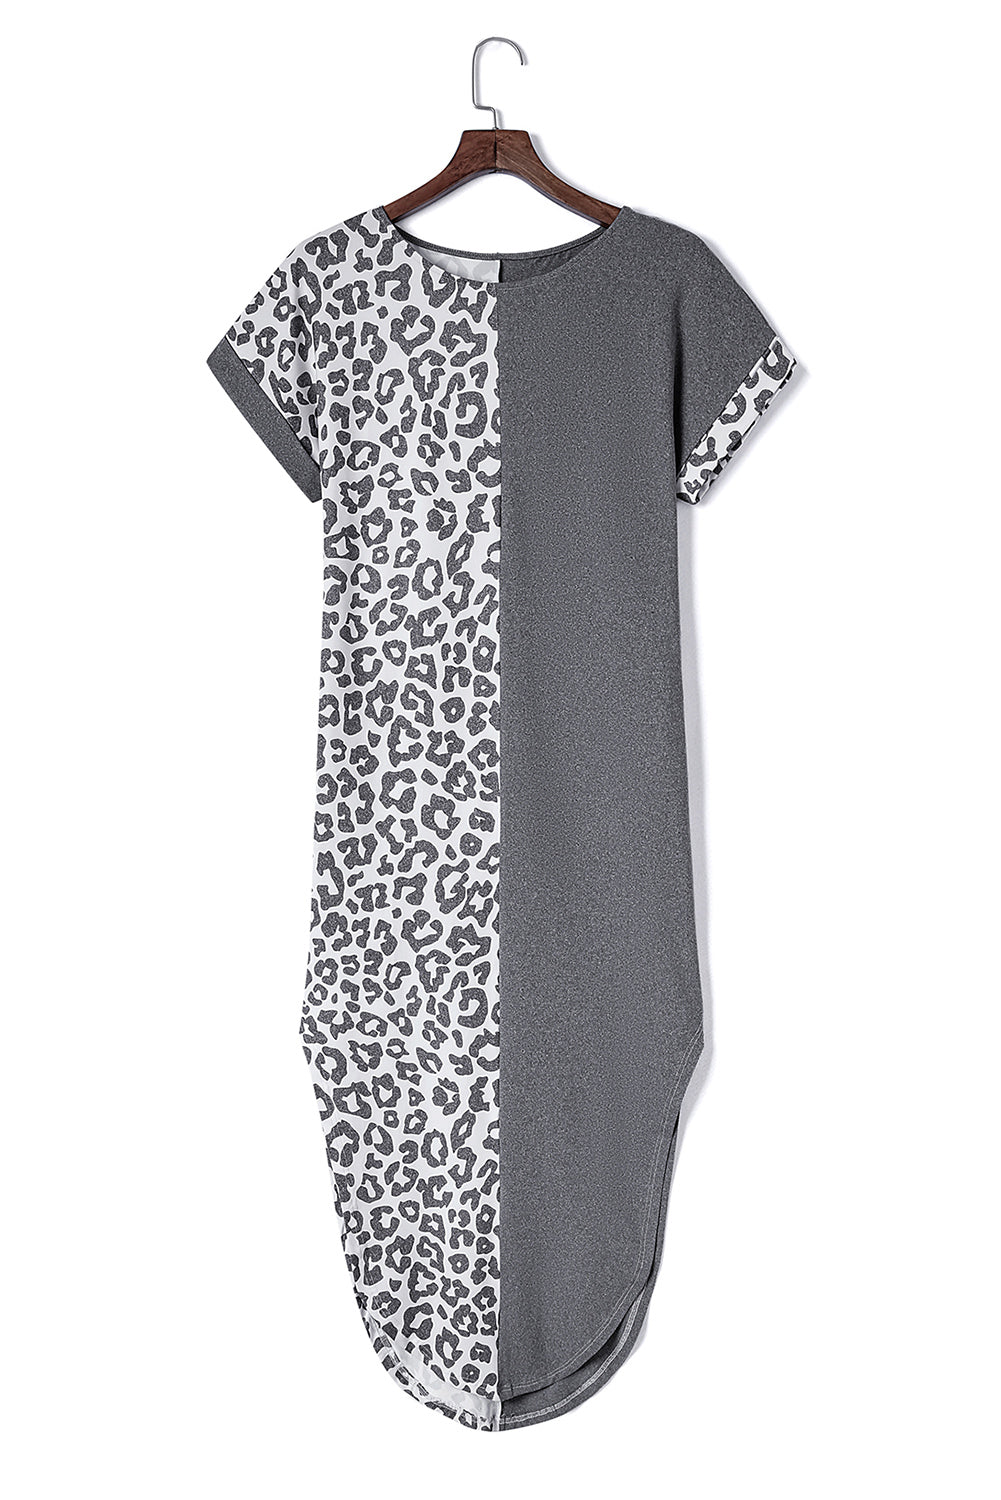 Black Contrast Solid Leopard Short Sleeve T-shirt Dress with Slits Blue Zone Planet